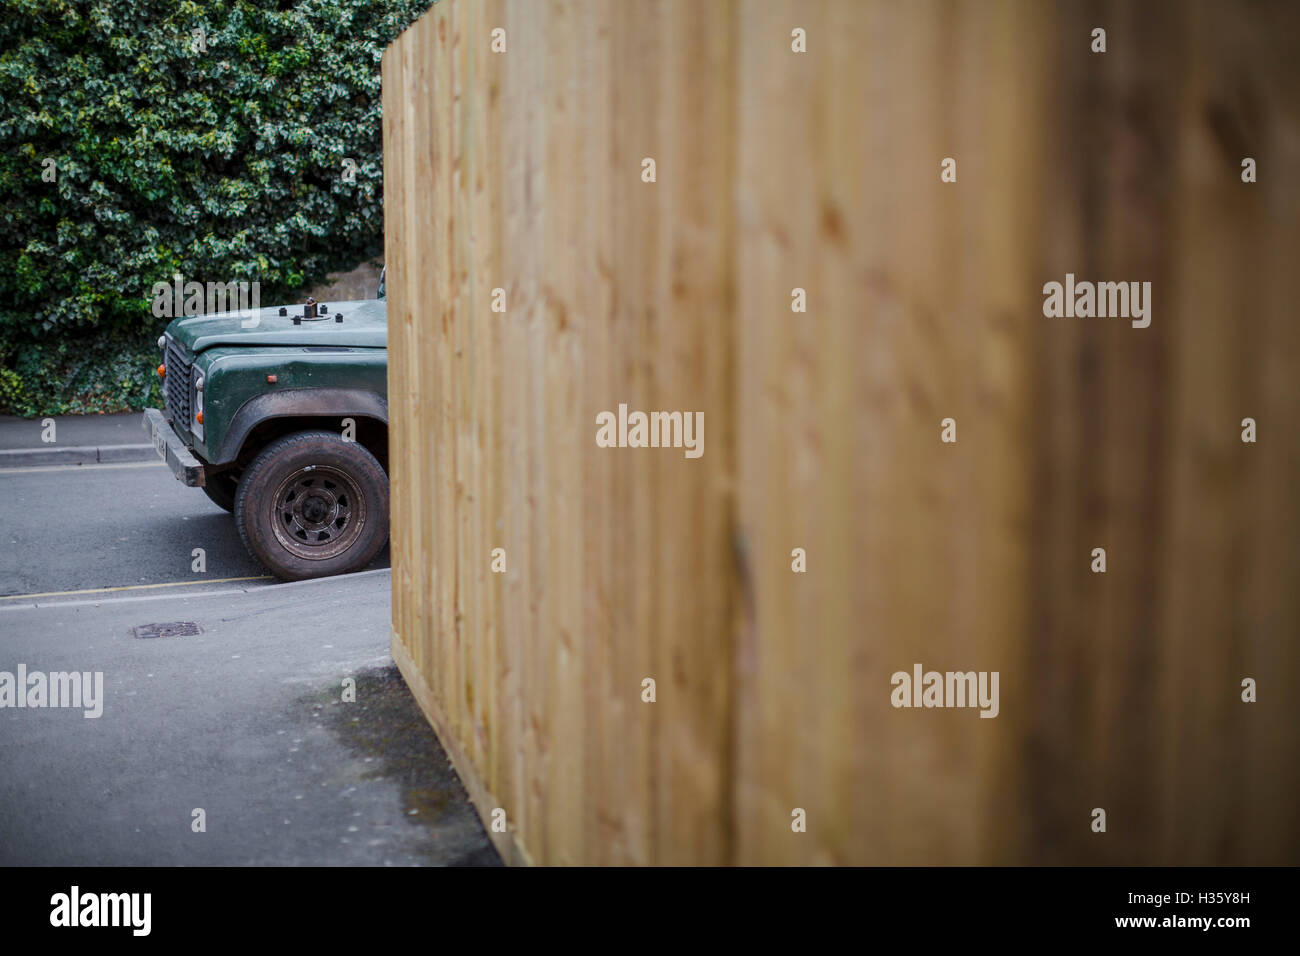 An old green land rover hidden behind a large wodden fence. Stock Photo